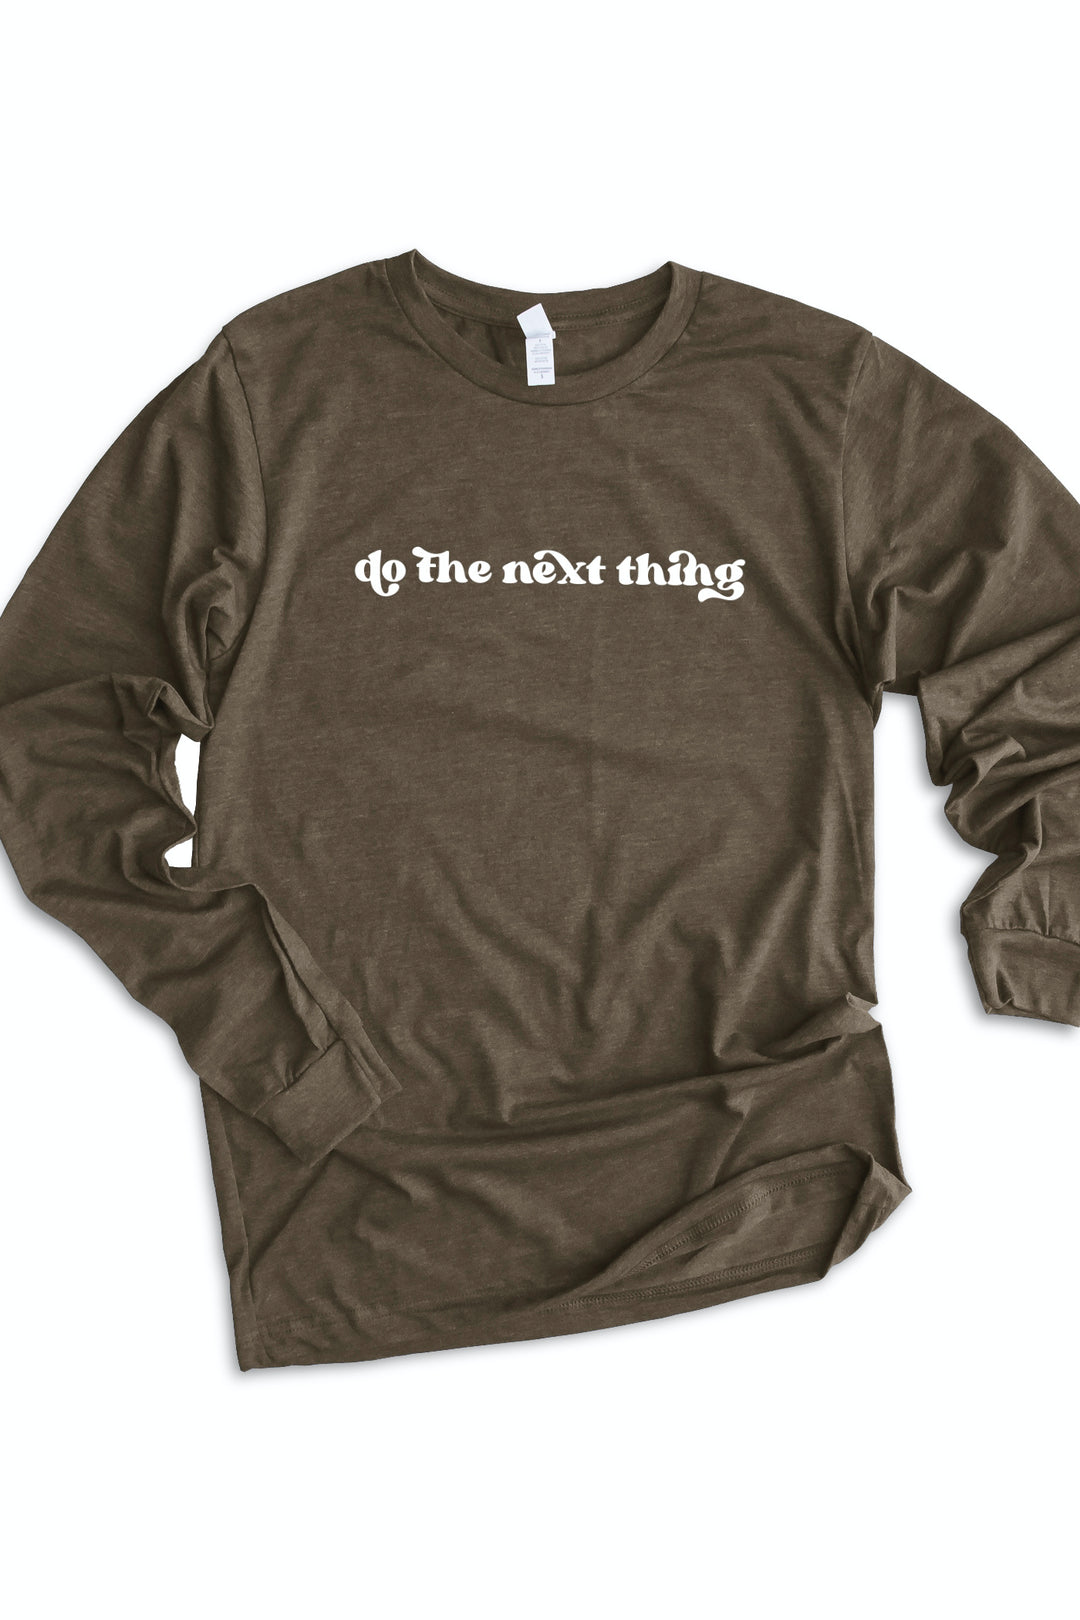 "Do the Next Thing" Long Sleeve Tee